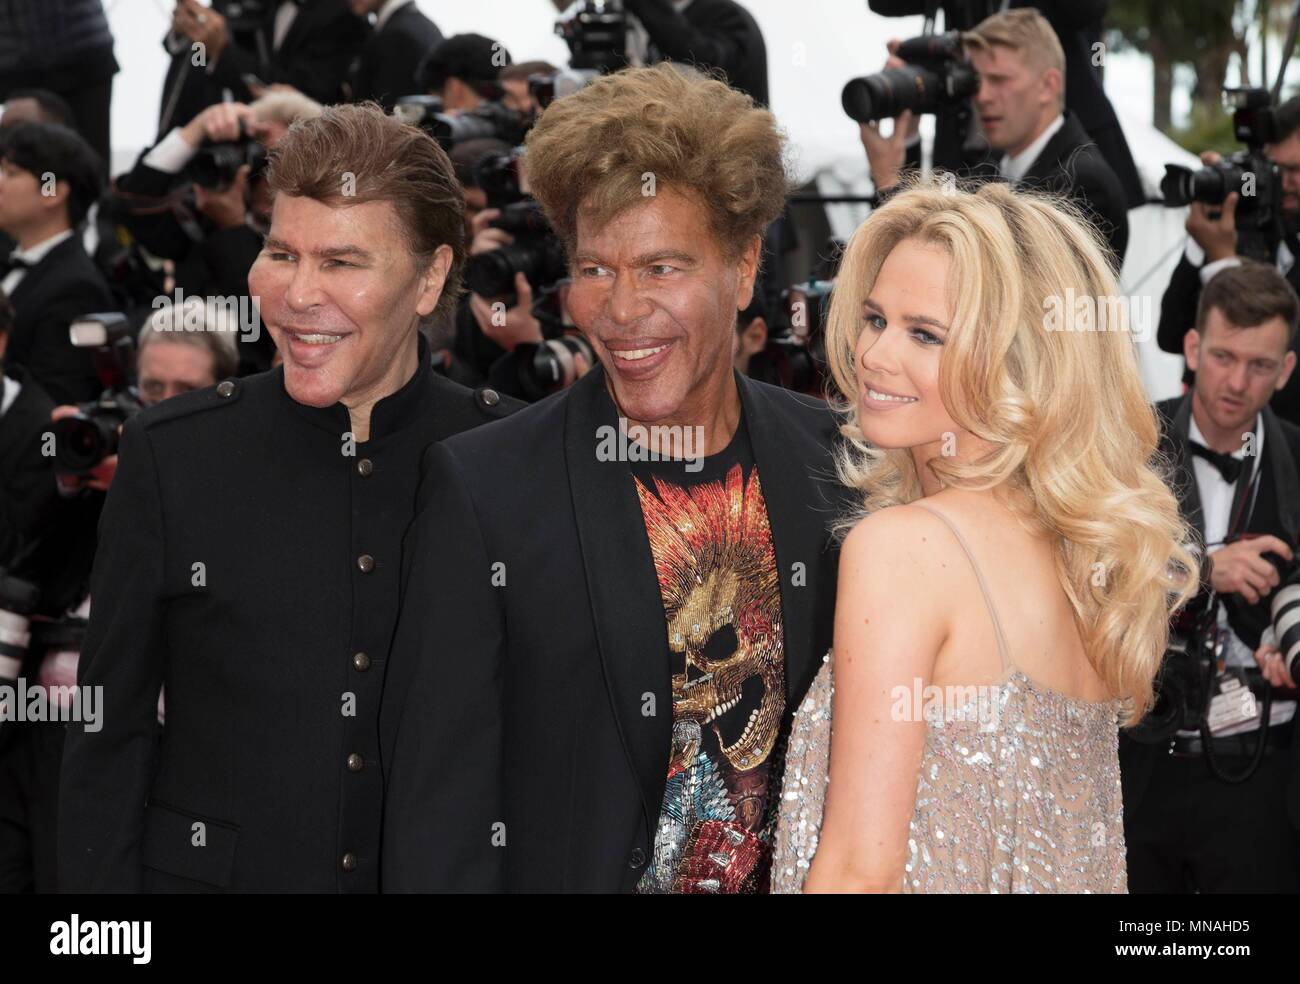 Grichka Bogdanoff, Julie Jardon and Igor Bogdanoff attend the premiere of 'Solo: A Star Wars Story' during the 71st Cannes Film Festival at Palais des Festivals in Cannes, France, on 15 May 2018. | usage worldwide Stock Photo